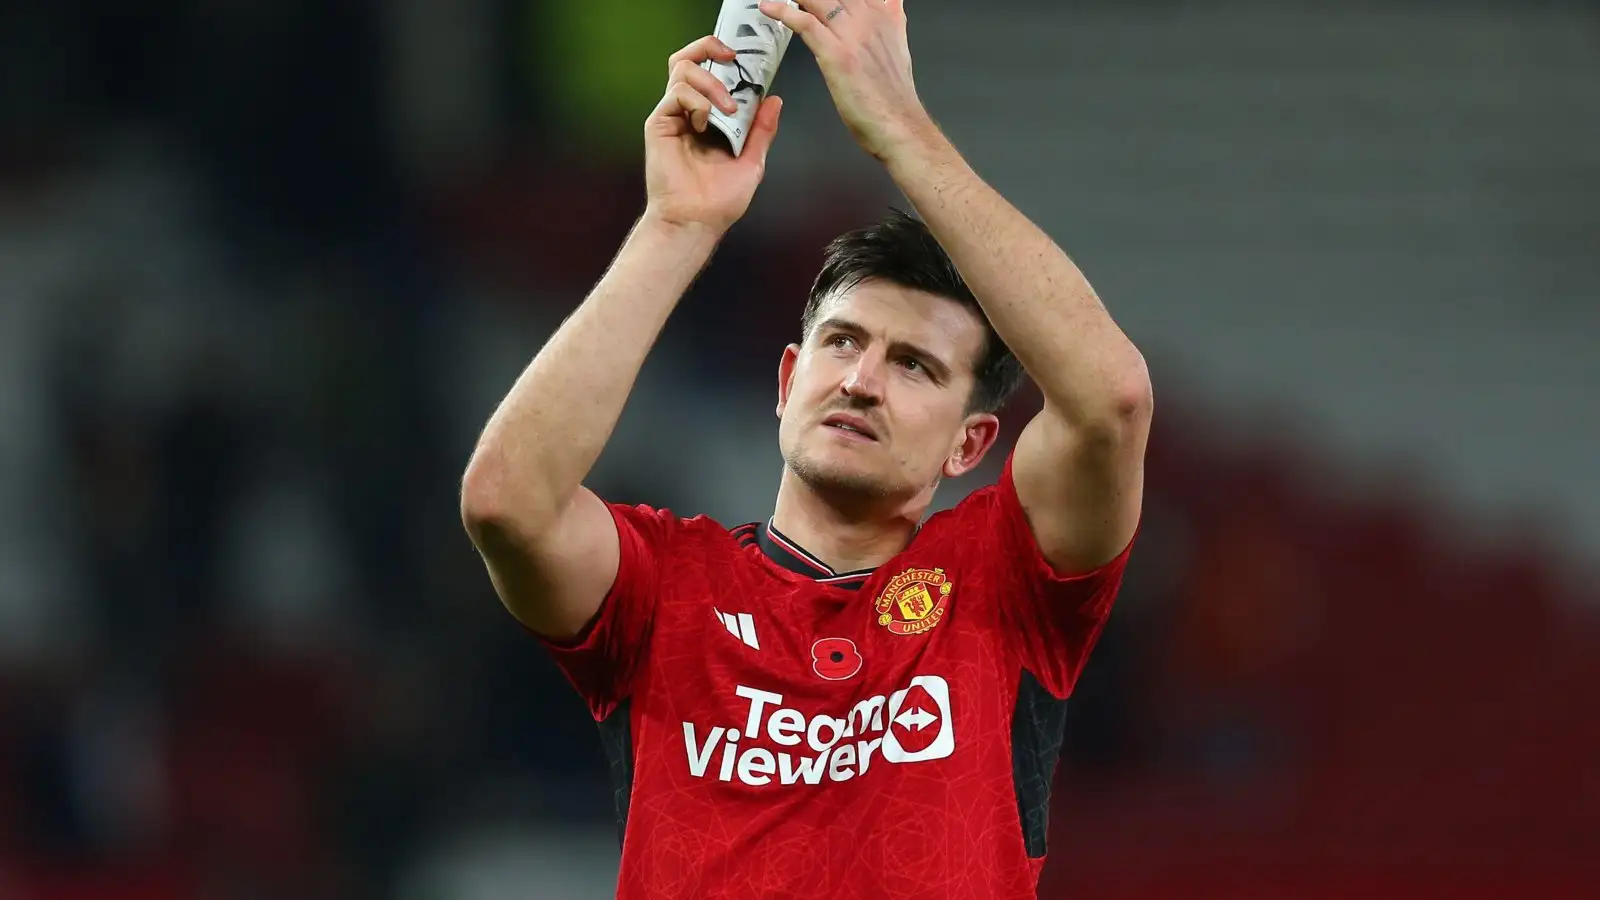 Maguire reserves special praise for ‘technically brilliant’ Man Utd team-mate after narrow Luton win